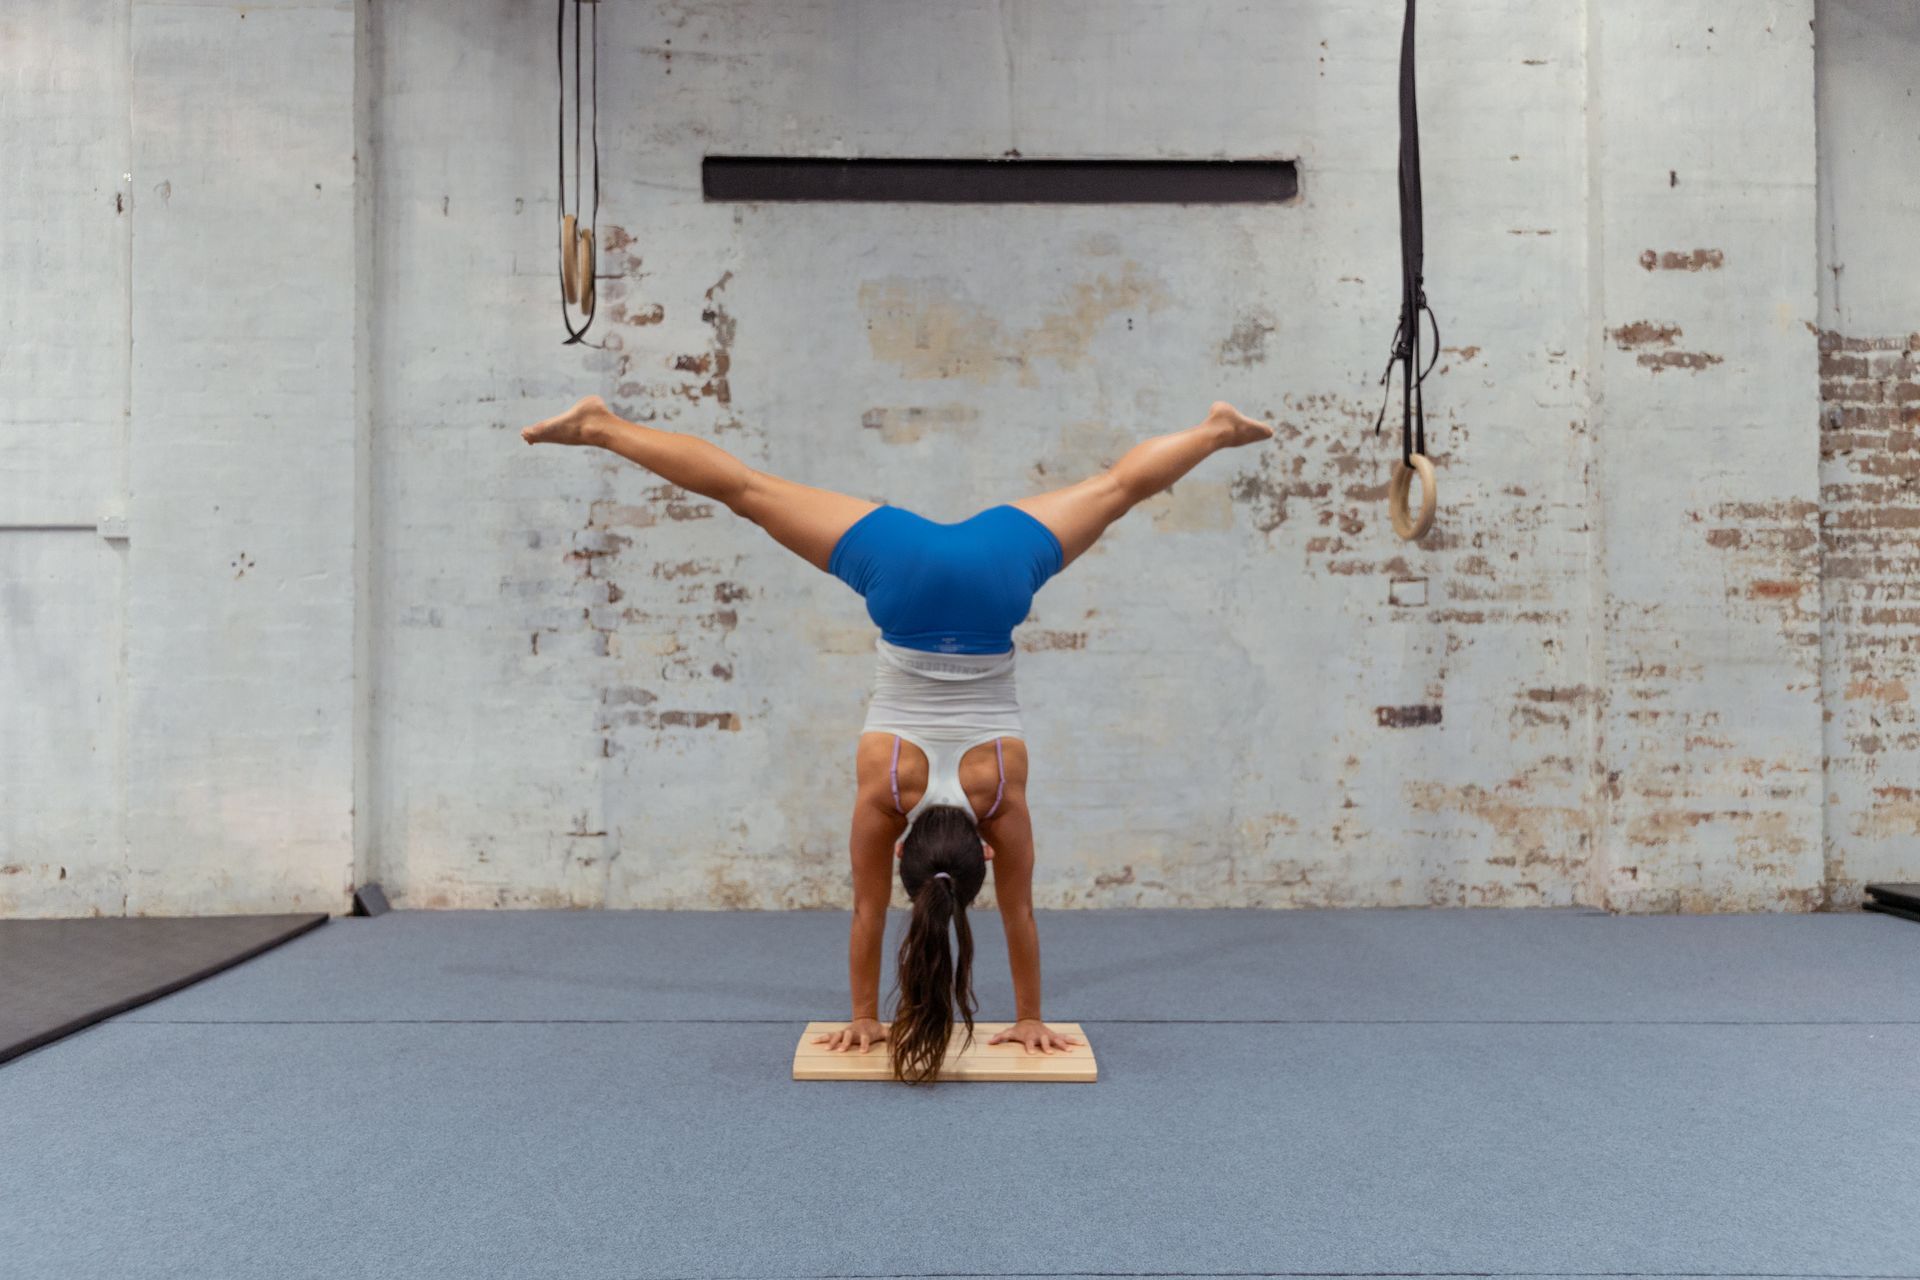 Image of a girl doing a handstand in the gym